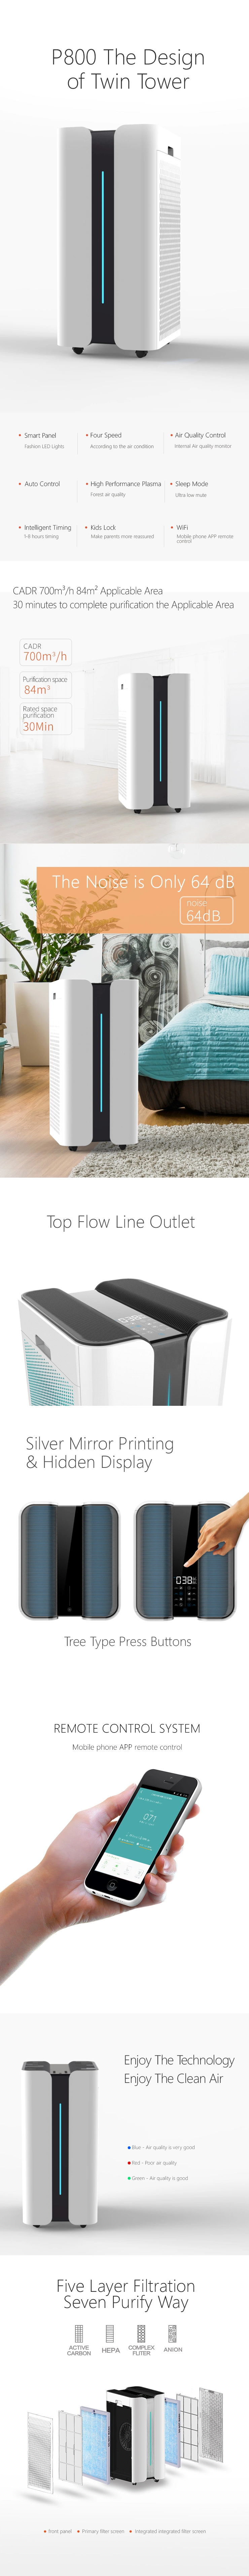 2019 WiFi Air Purifier with HEPA Filter Activated Carbon Filter